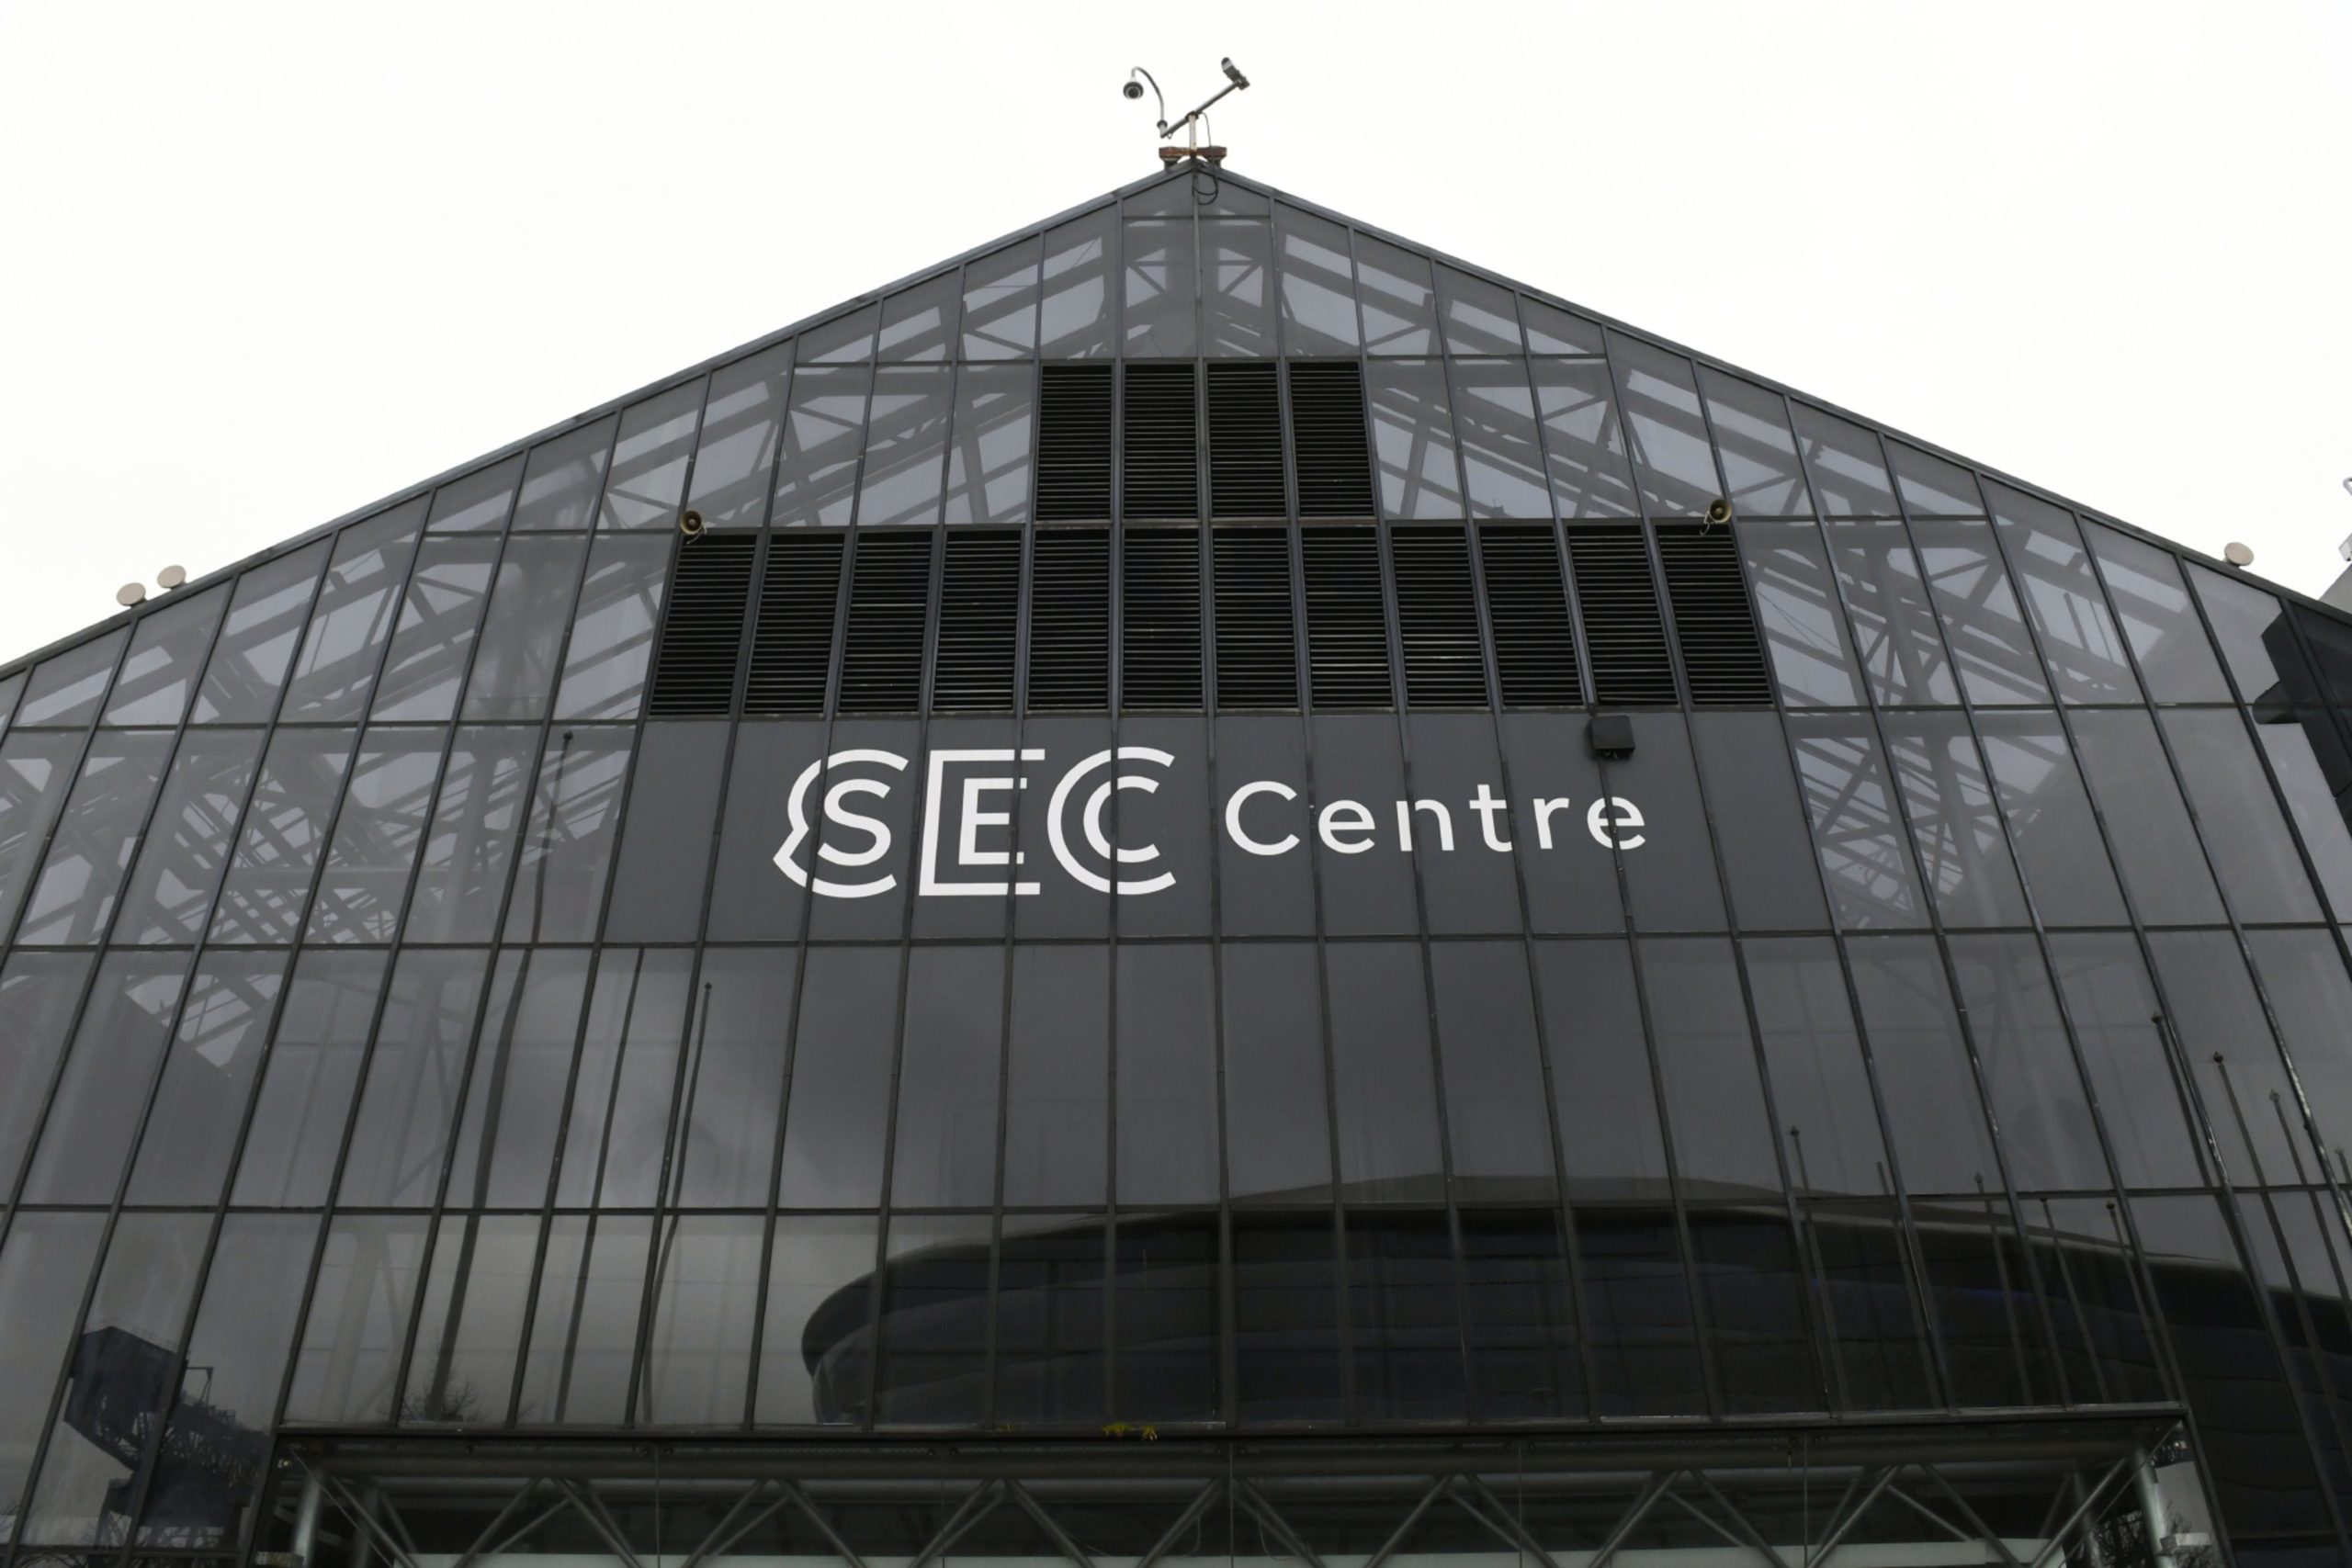 The SEC Centre is pictured during the ongoing coronavirus pandemic.